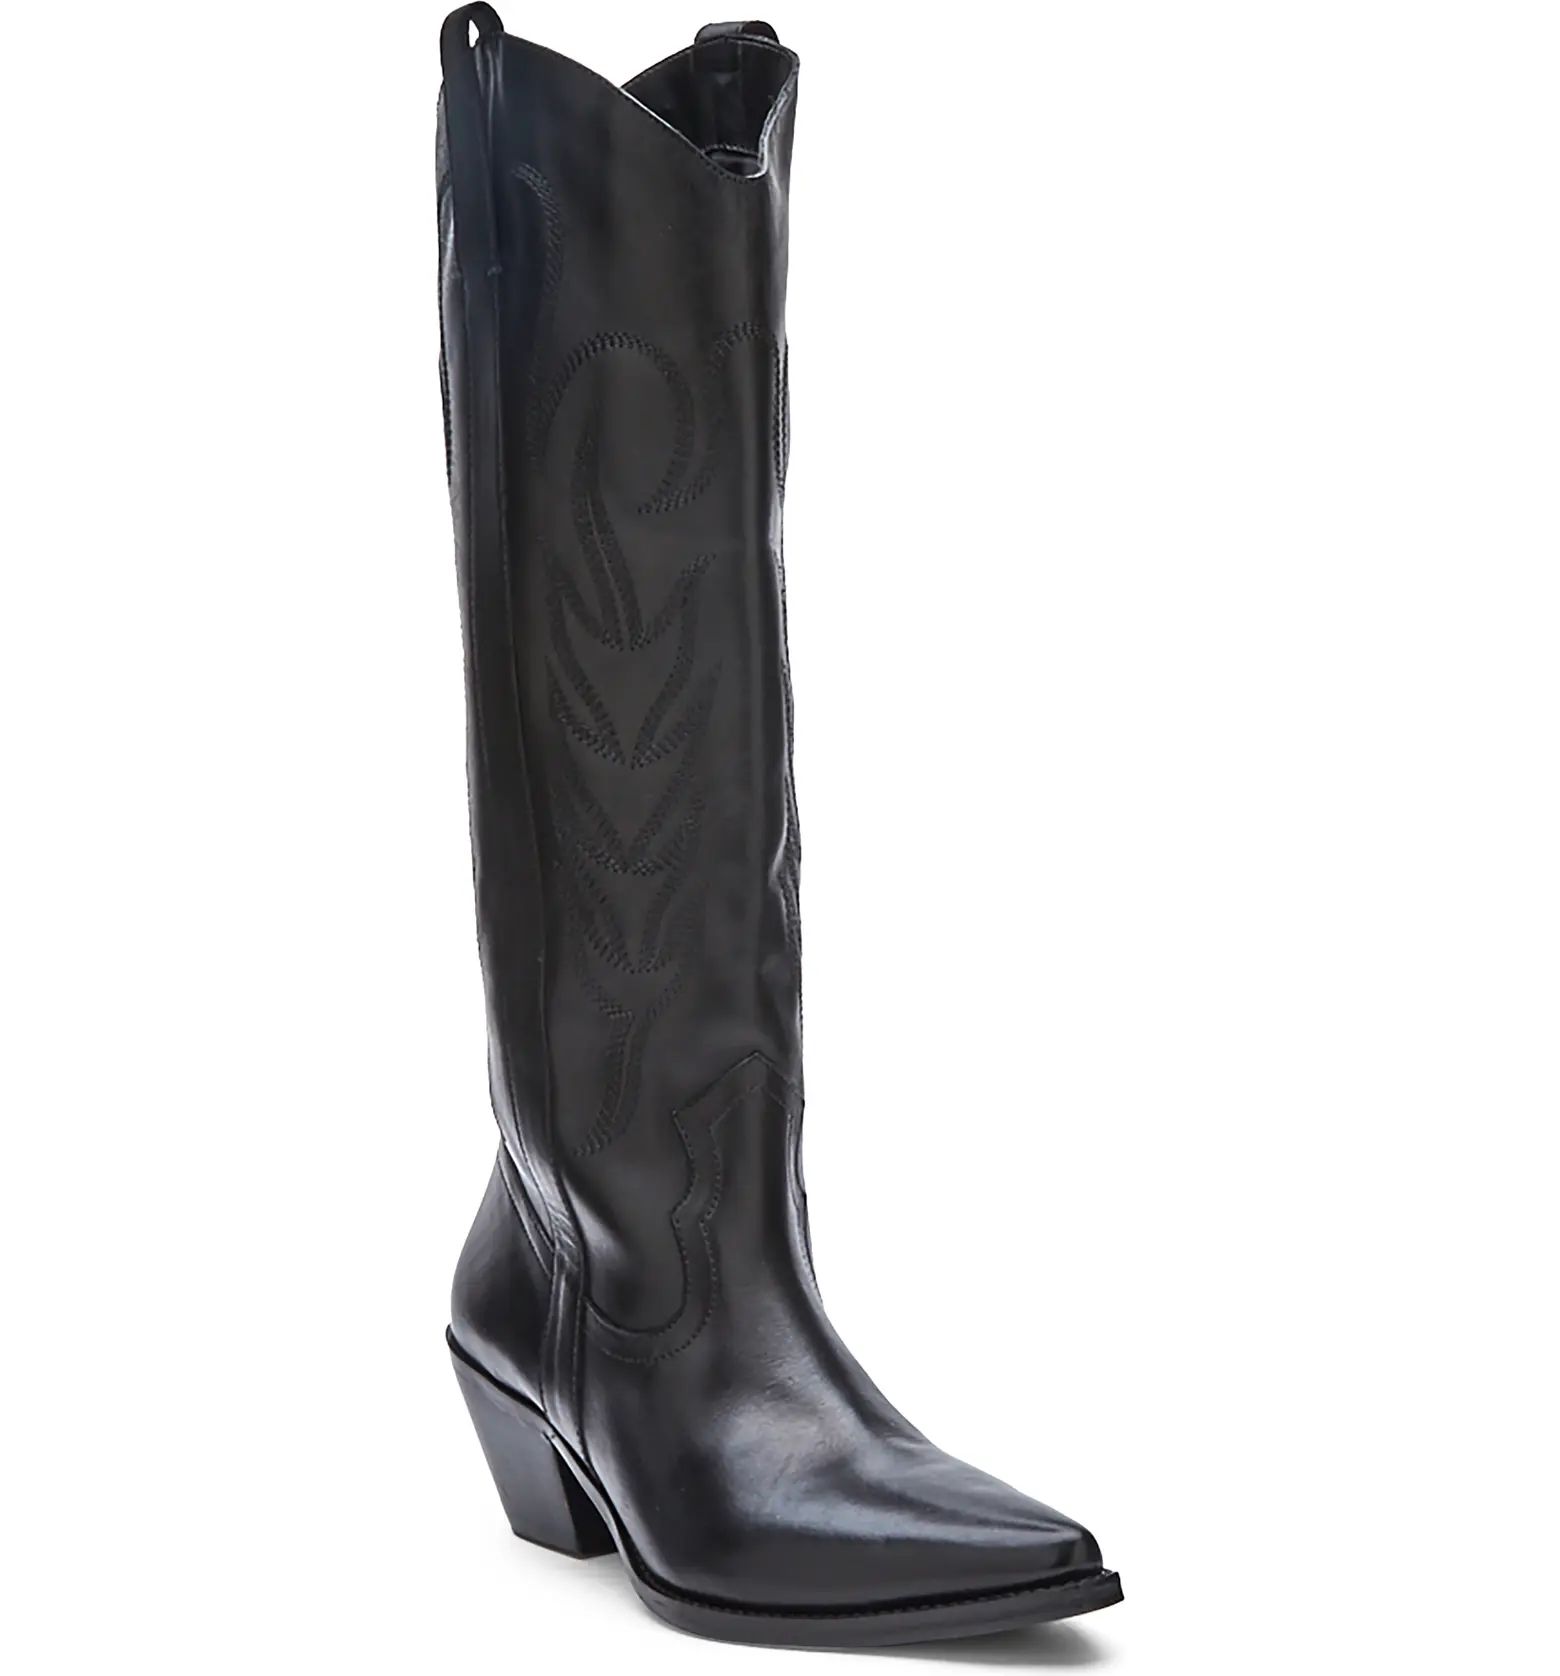 Agency Western Pointed Toe Boot (Women) | Nordstrom